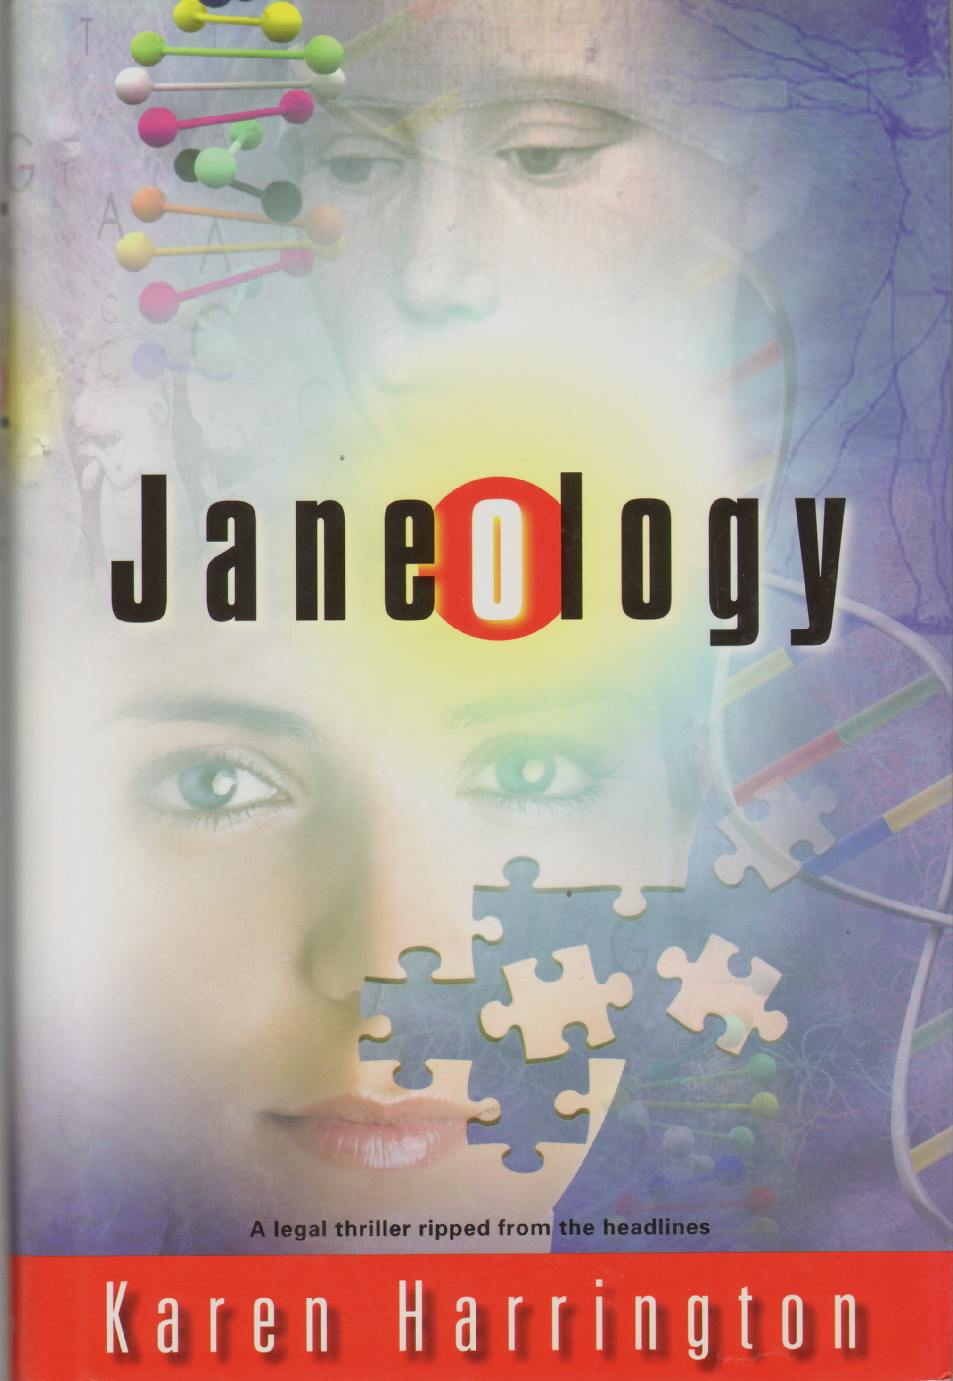 Image for JANEOLOGY